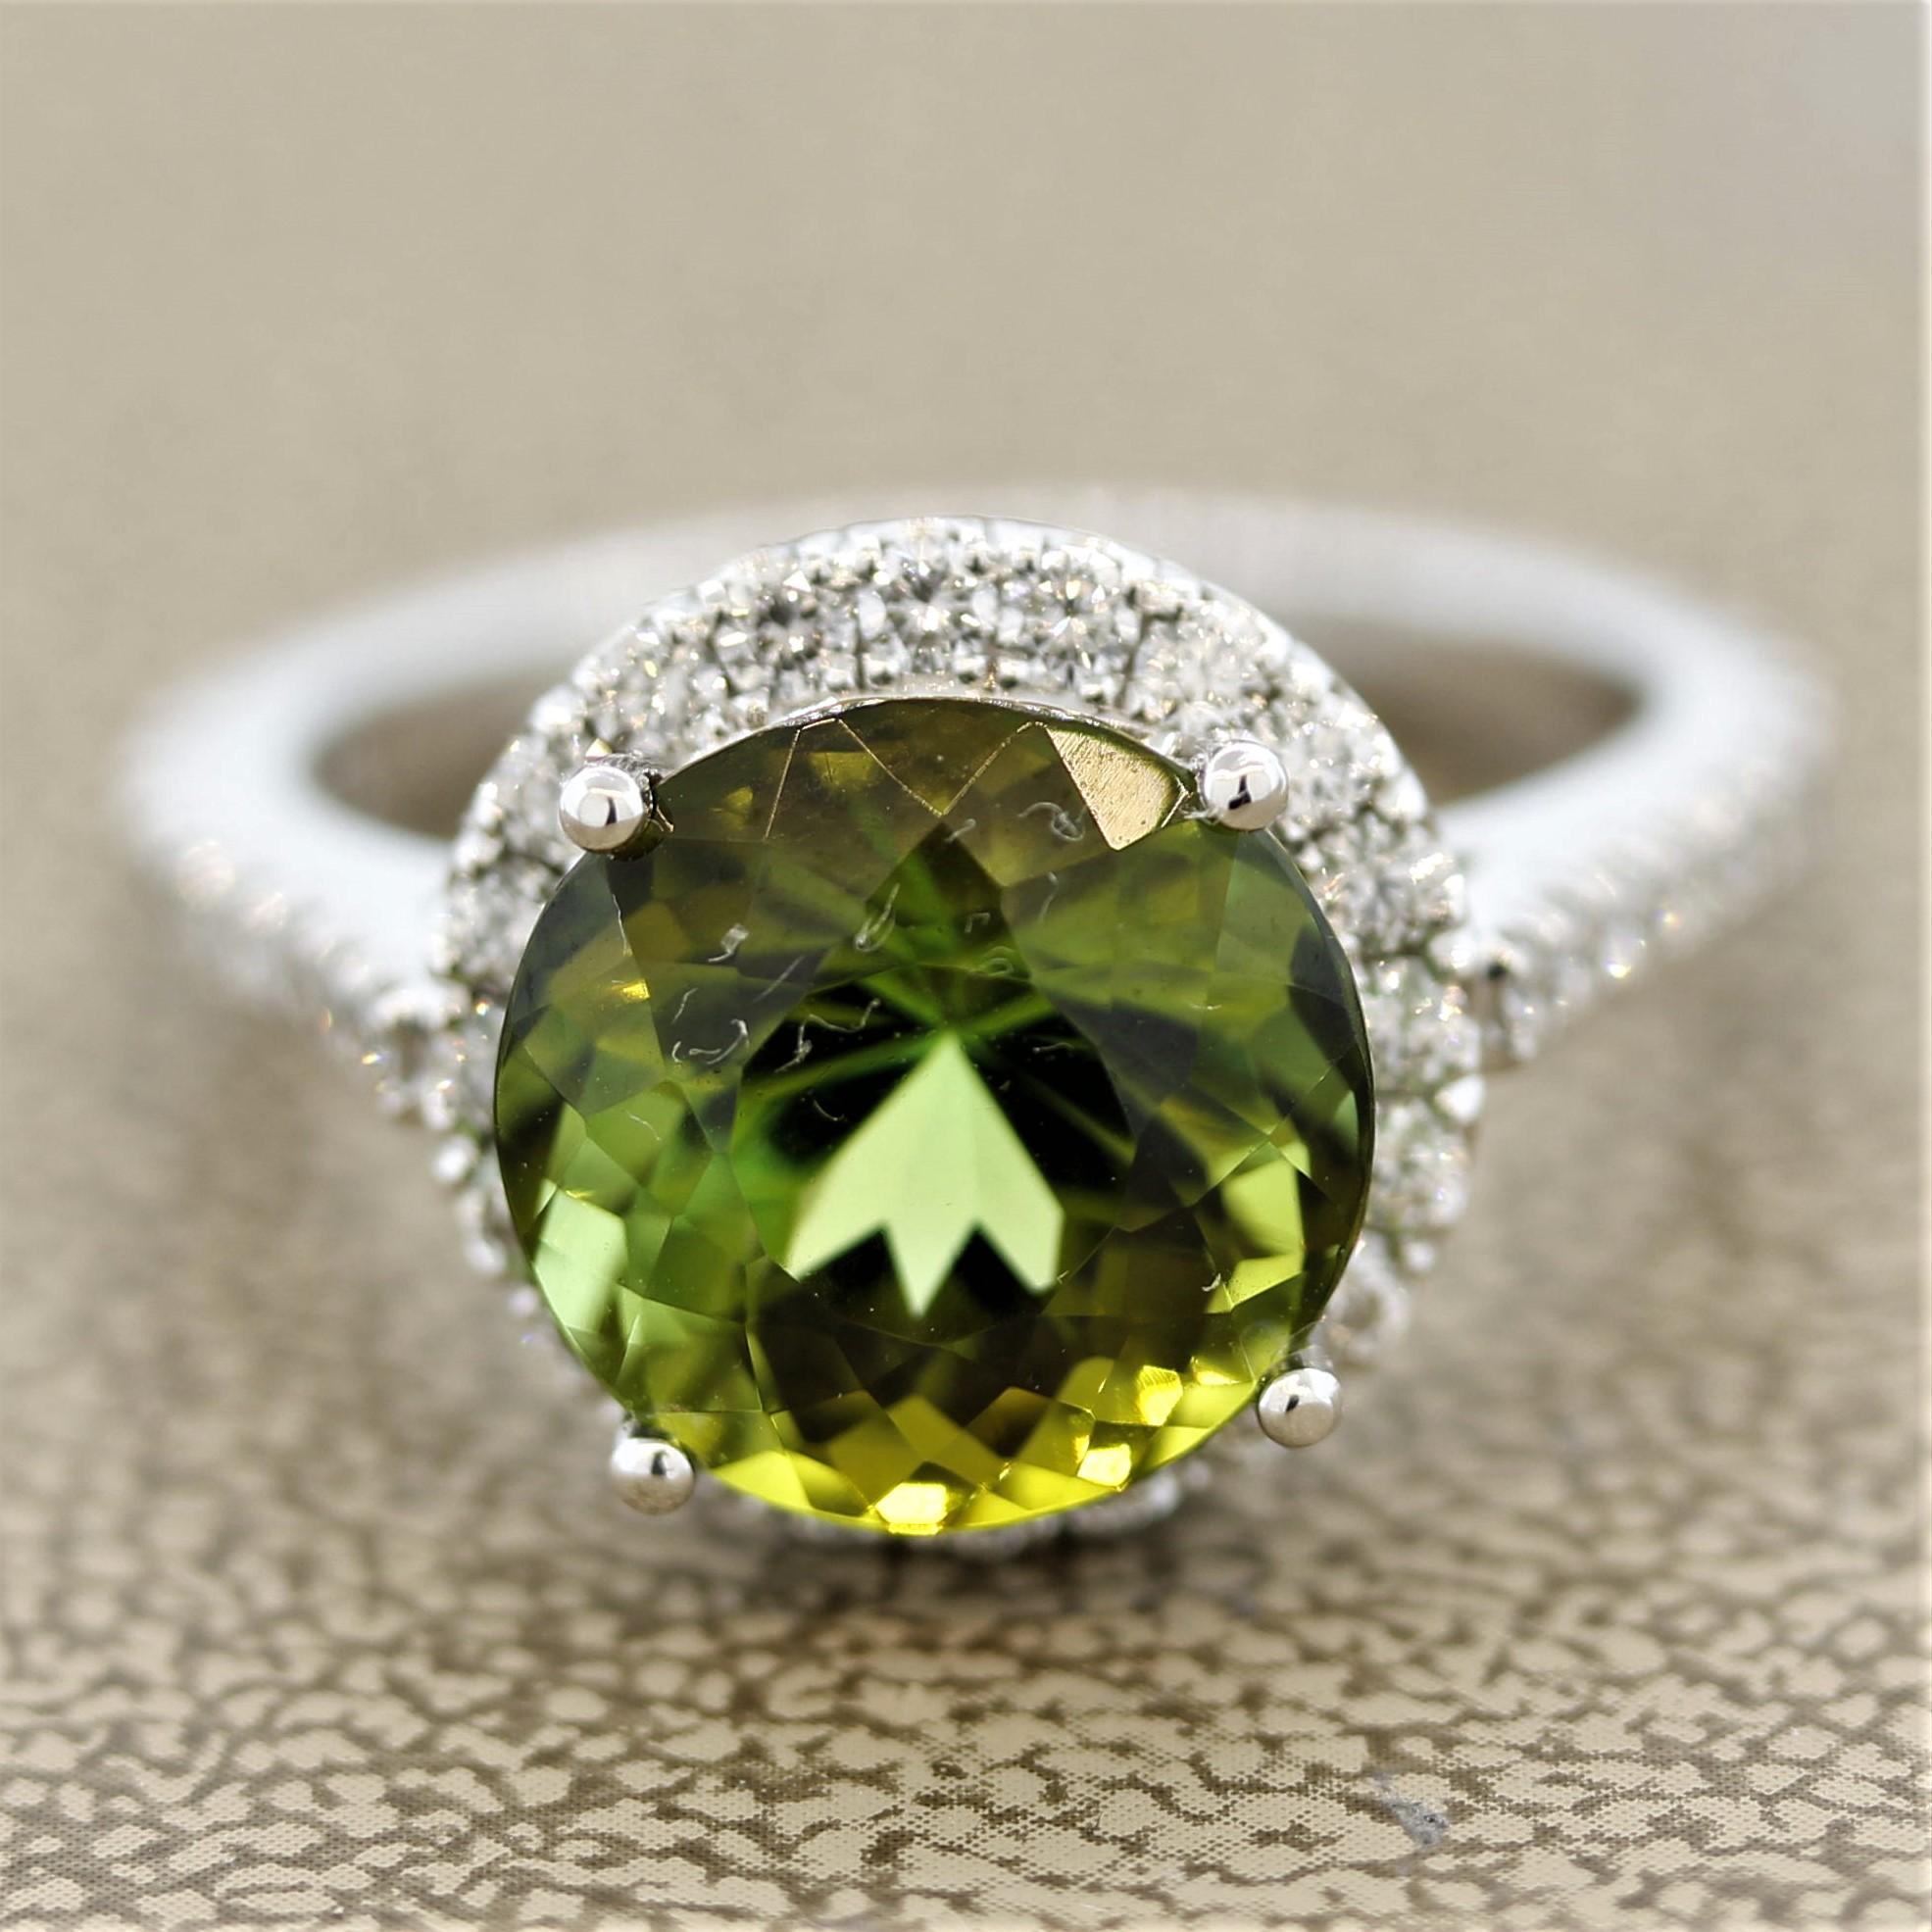 A lovely tourmaline ring. It features a 5.36 carat round cut tourmaline with a lush green color and great brilliance. It is accented by 0.73 carats of round brilliant cut diamonds which halo the tourmaline and are set on the sides of the ring.